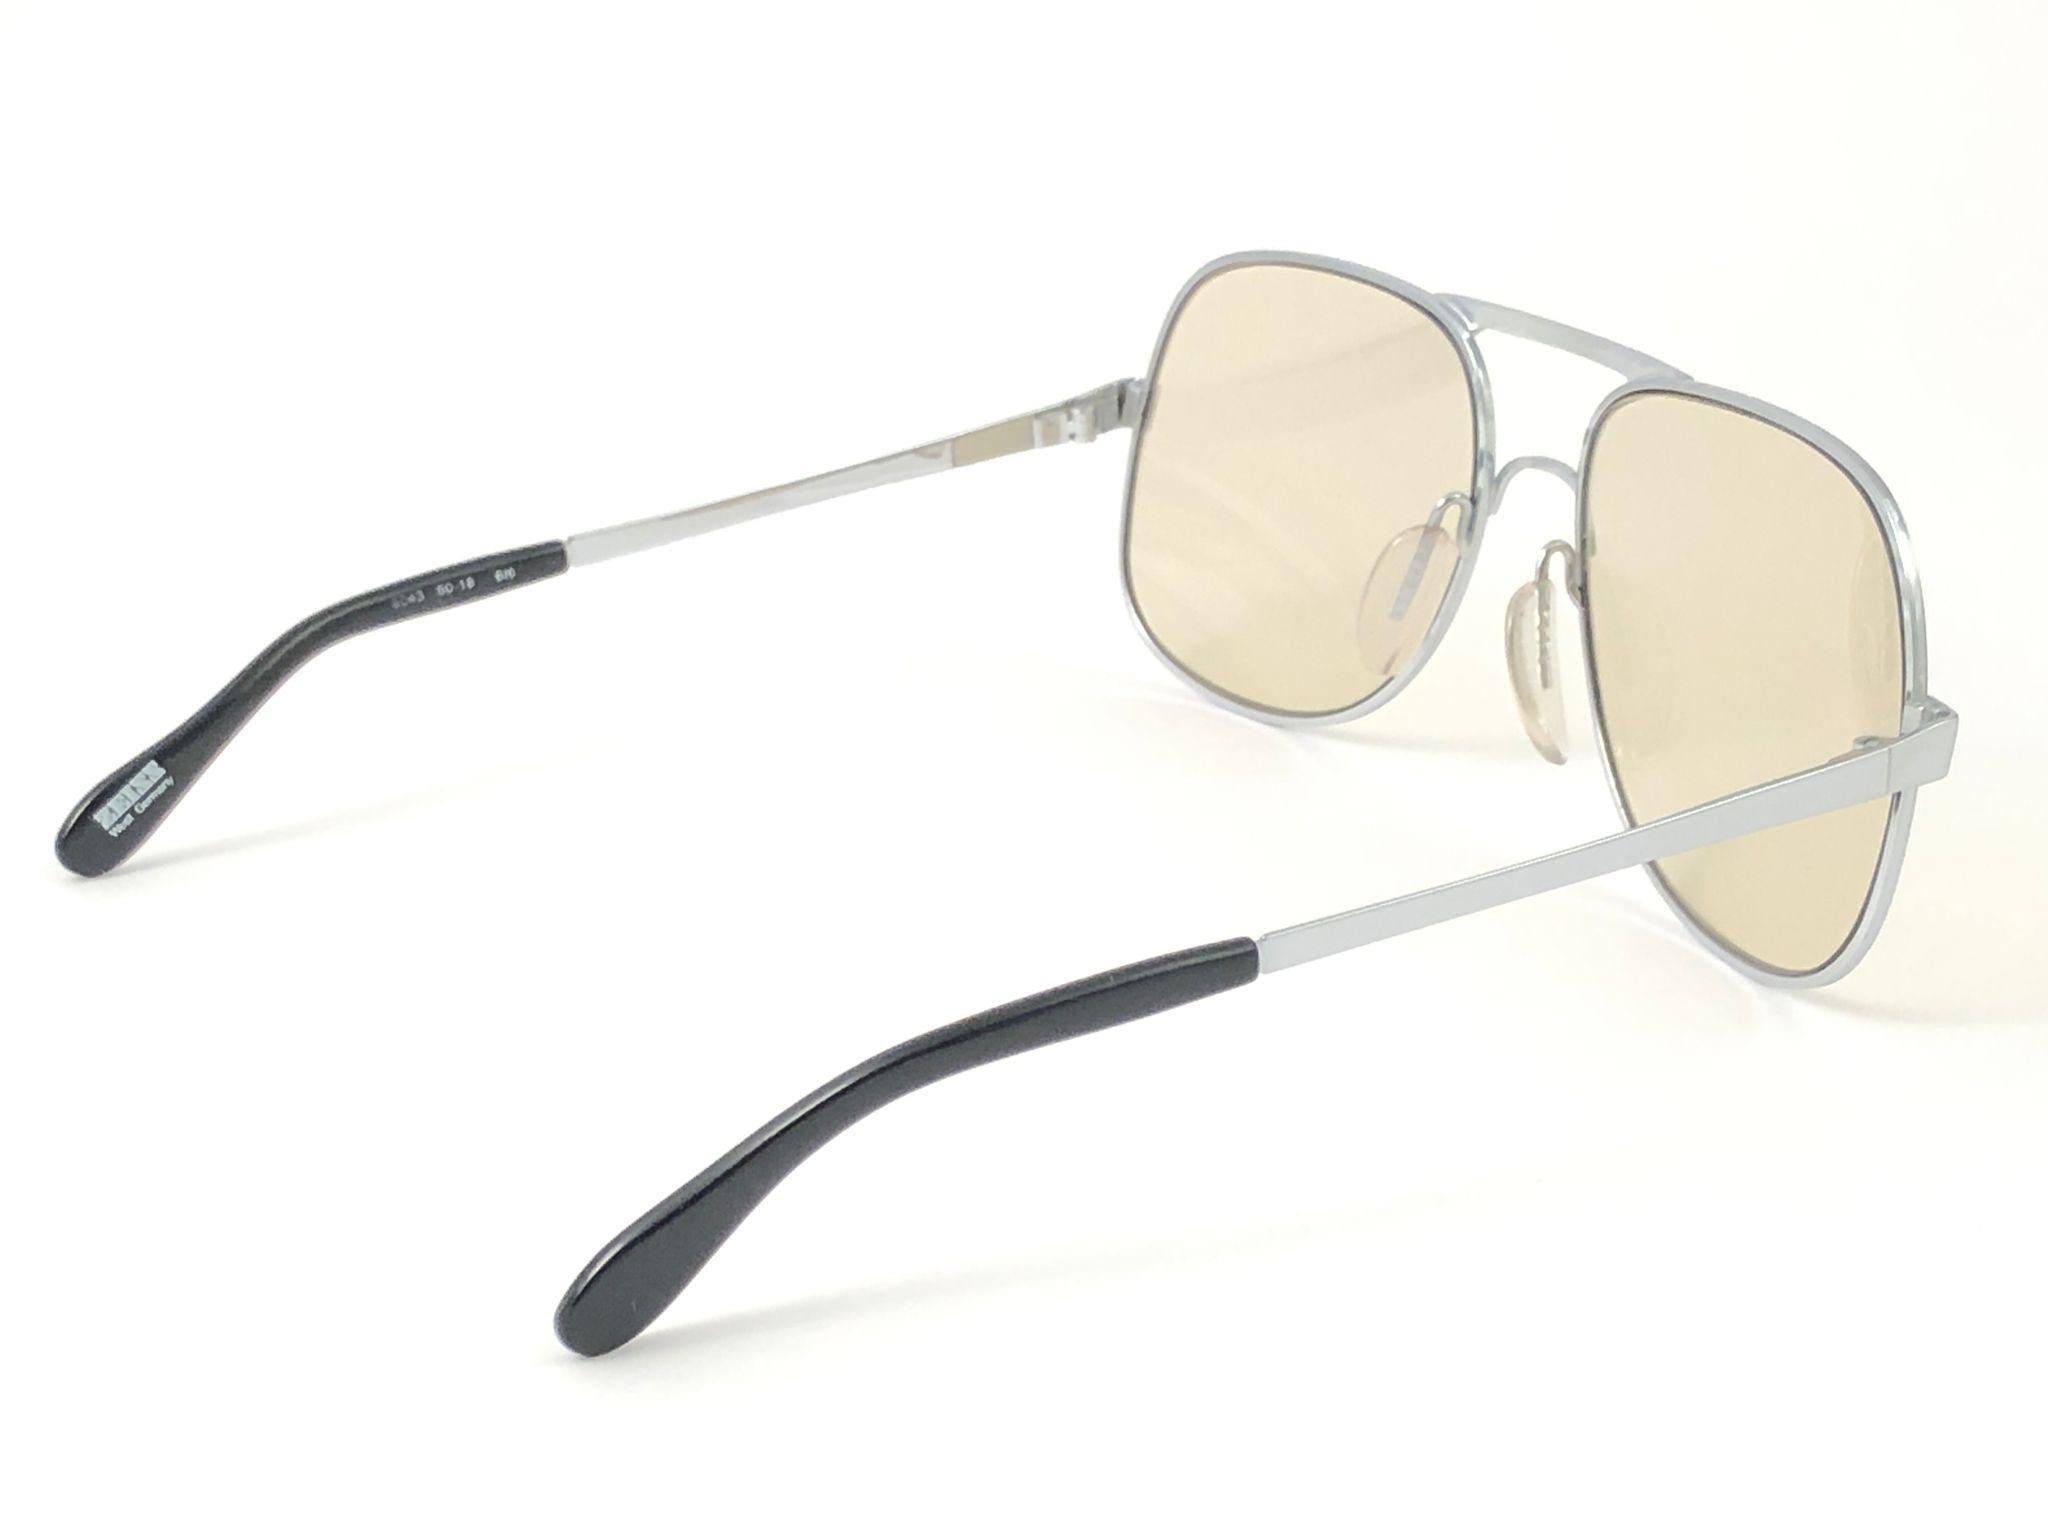 New Vintage Metzler Zeiss Umbramatic 2083 Oversized Sunglasses West Germany 80's For Sale 3